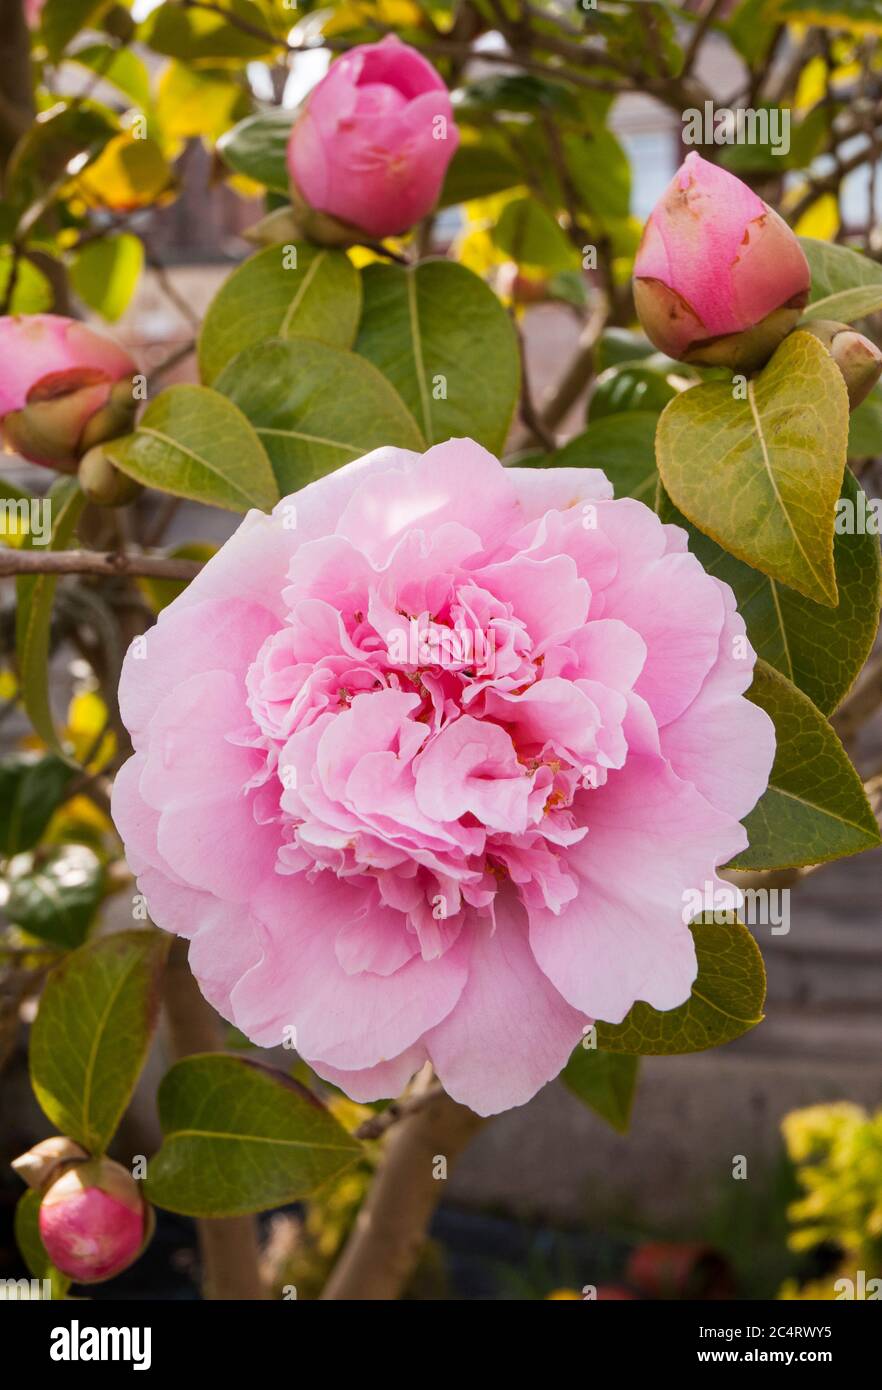 Close up of a pink Anemone formed Camellia japonica flower with buds in background. A fully hardy winter to spring flowering evergreen shrub. Stock Photo